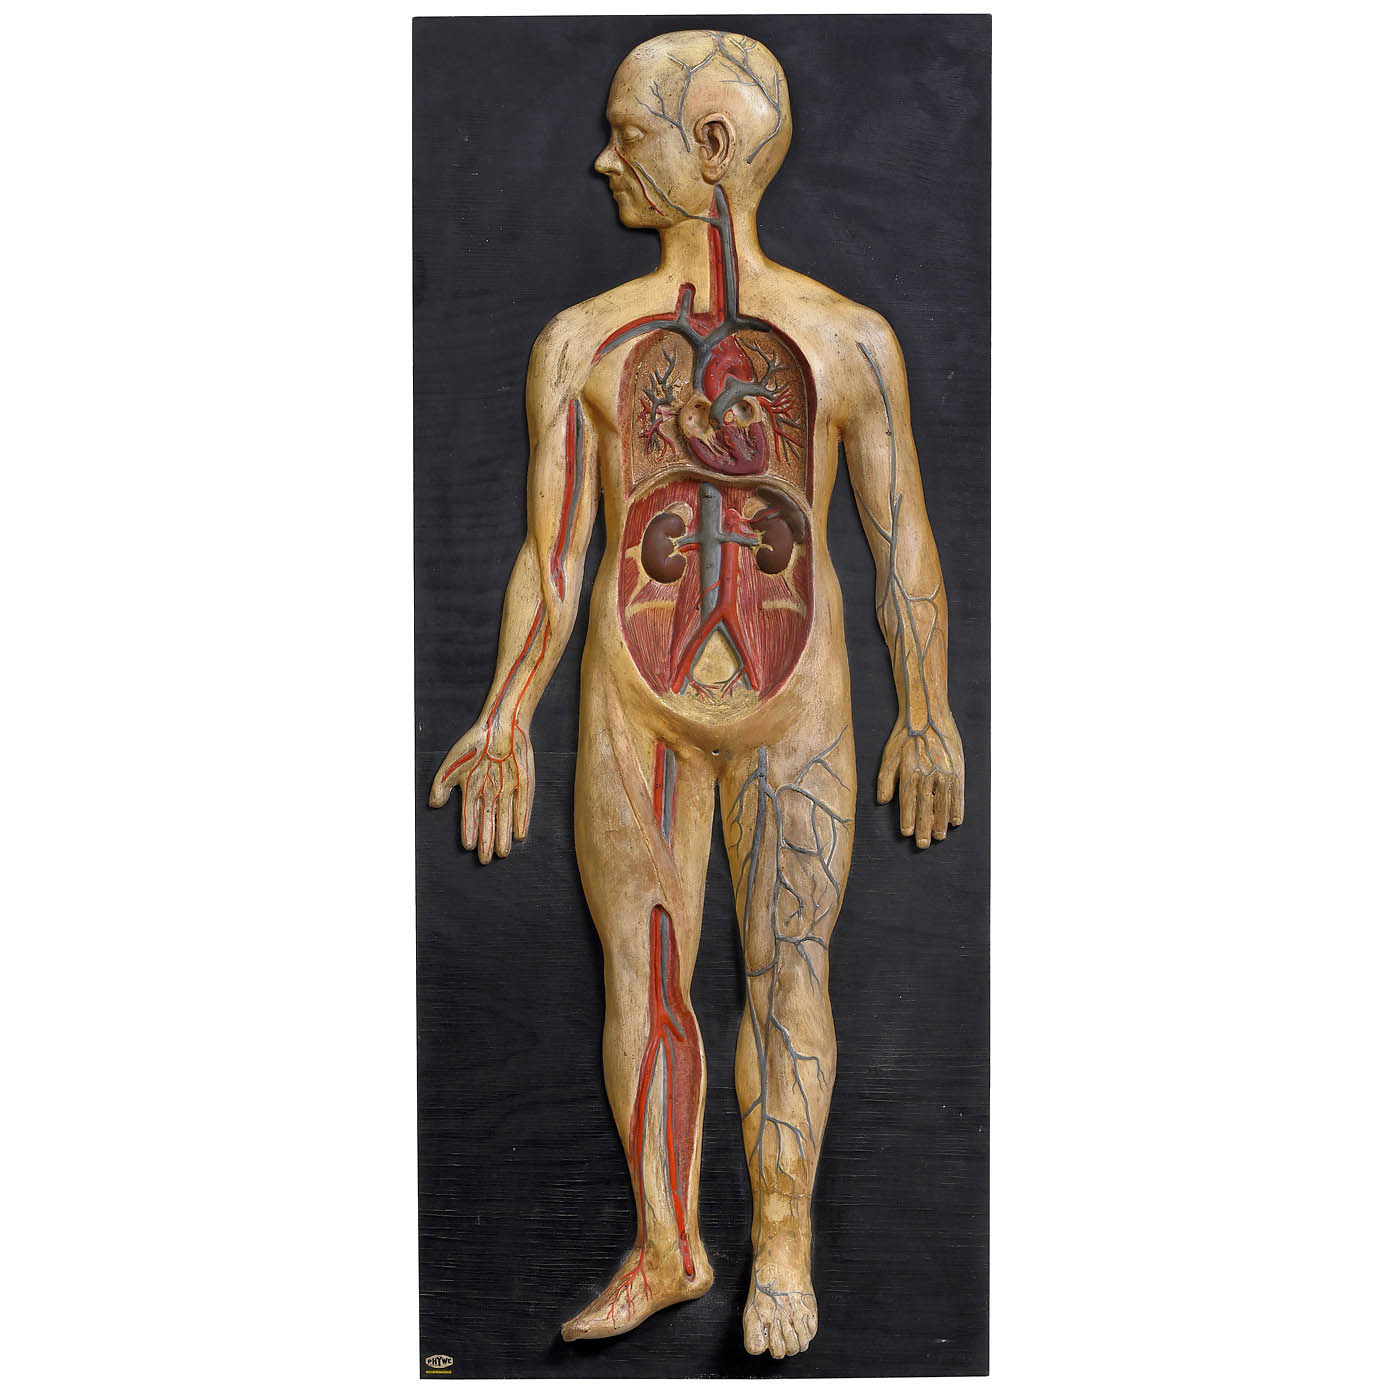 Anatomical Model of the Human Body, c. 1925 - Image 3 of 3